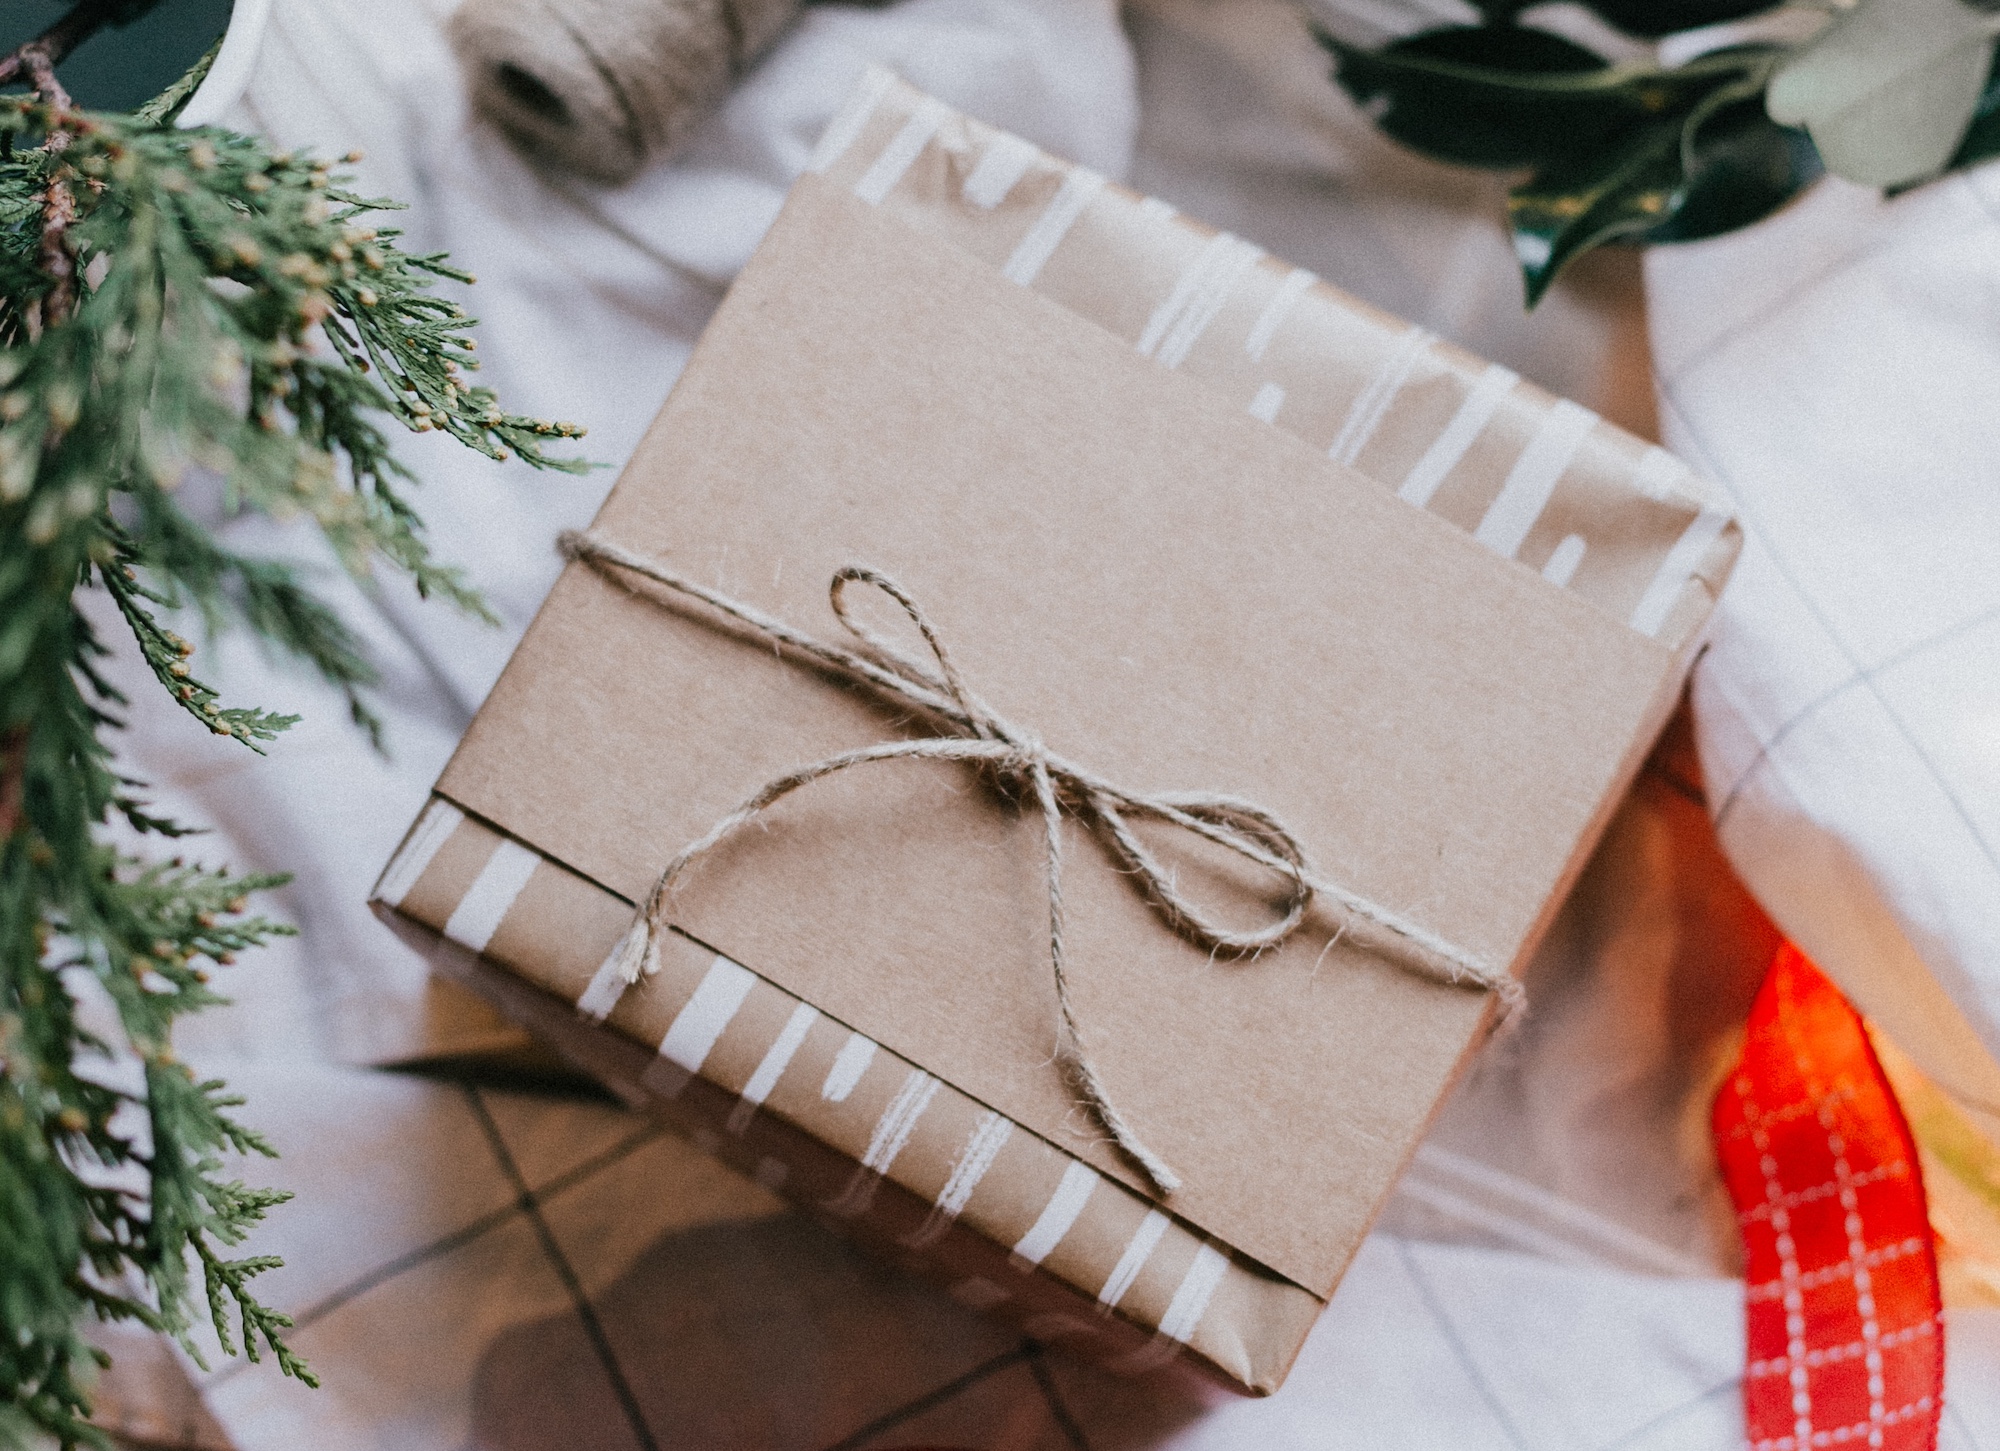 Do good while holiday shopping with Caring’s 2023 Gift Guide